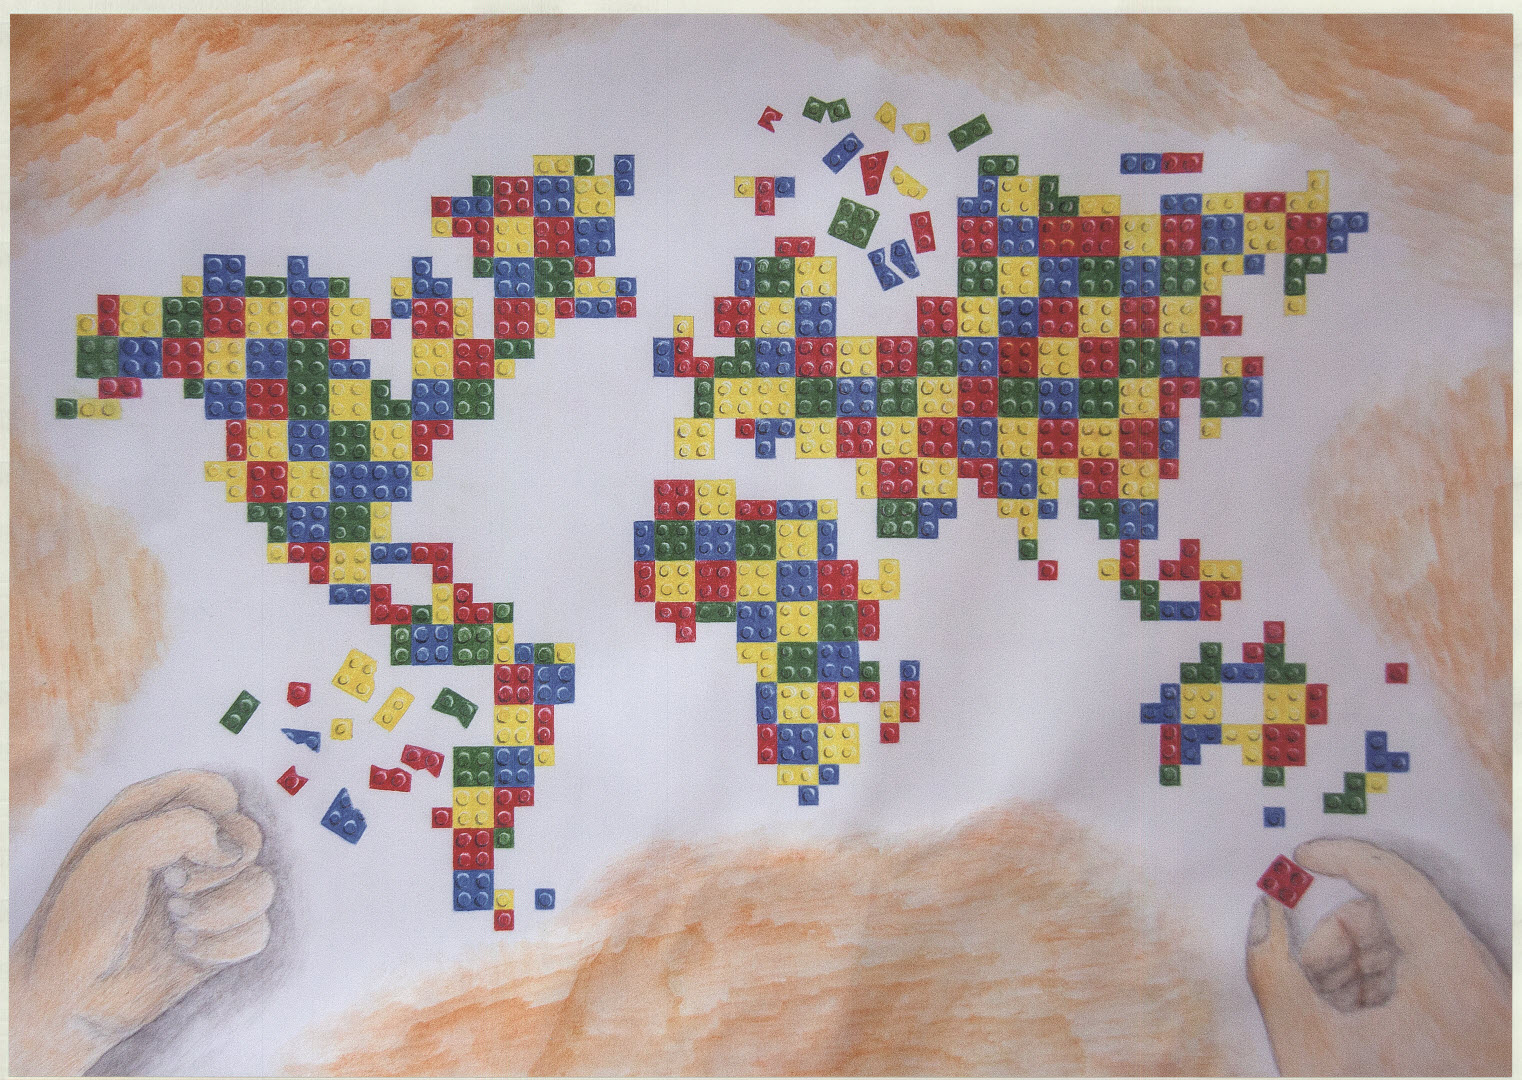 Shows the world in lego pieces